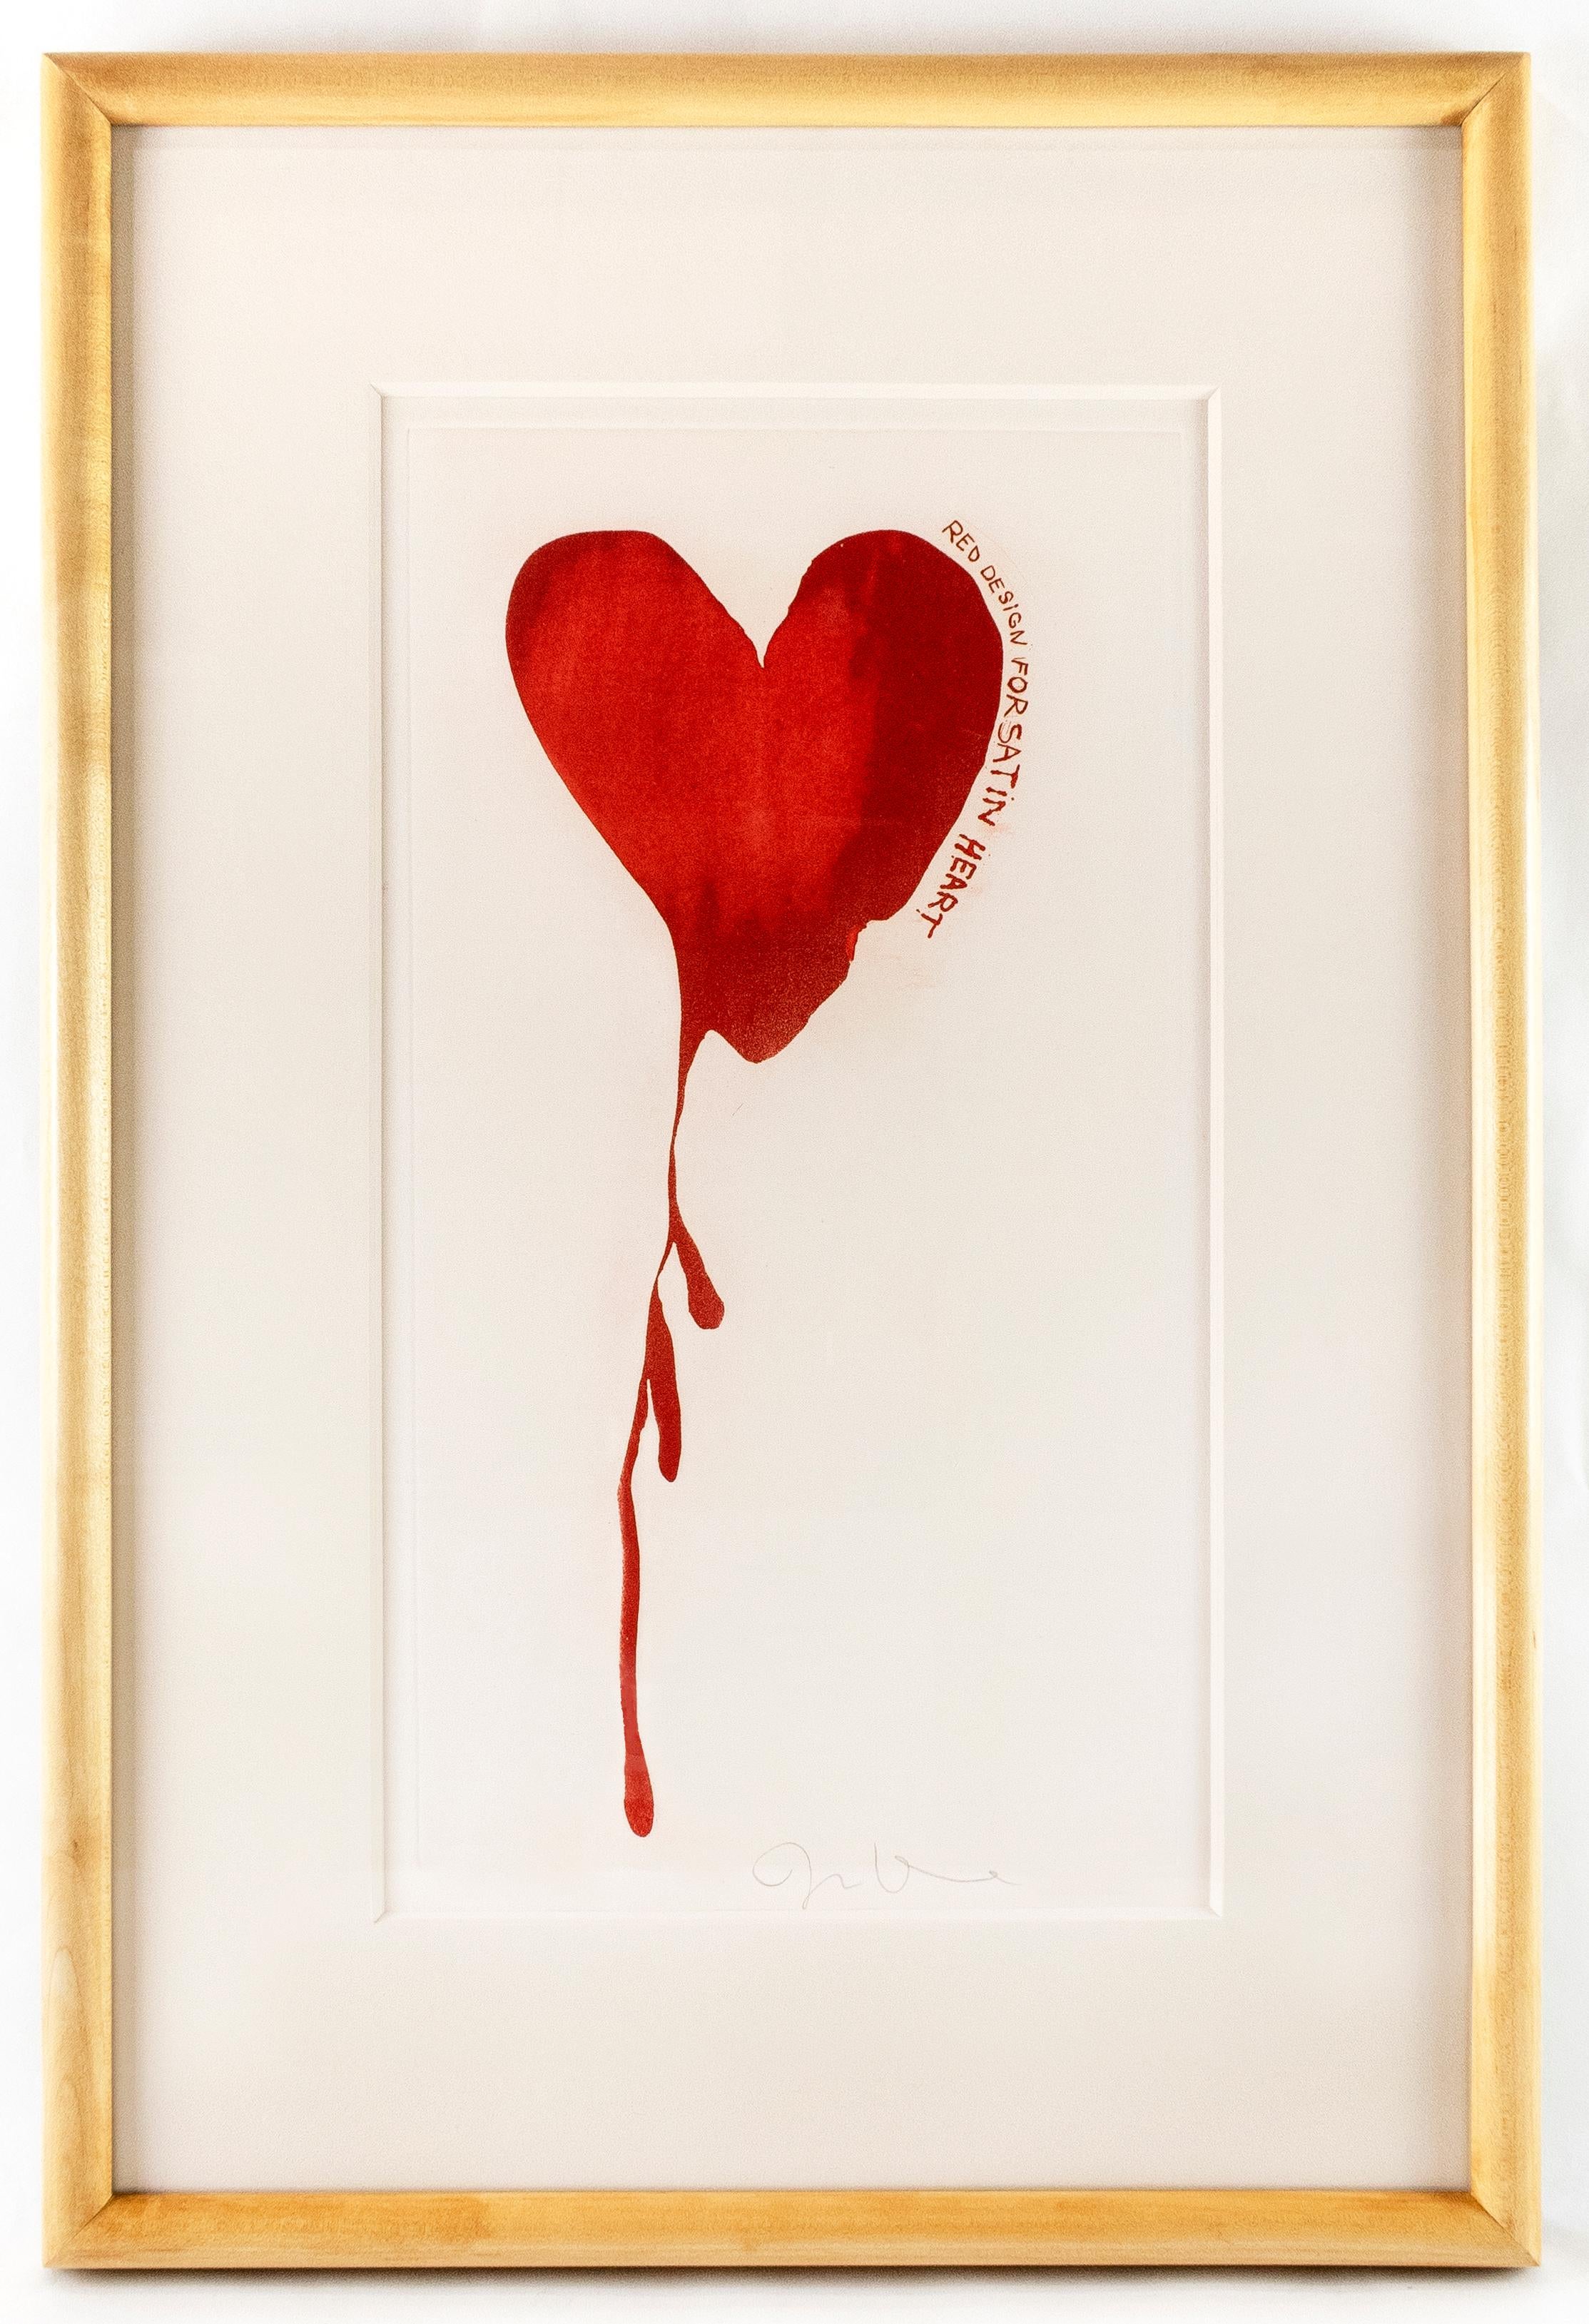 This print depicts one of Jim Dine's signature subjects, a deep red heart dripping down the page, appearing as a bleeding heart. Along the right side of the heart, hand-drawn text reads: “Red design for satin heart”. Dine was working on the sets and